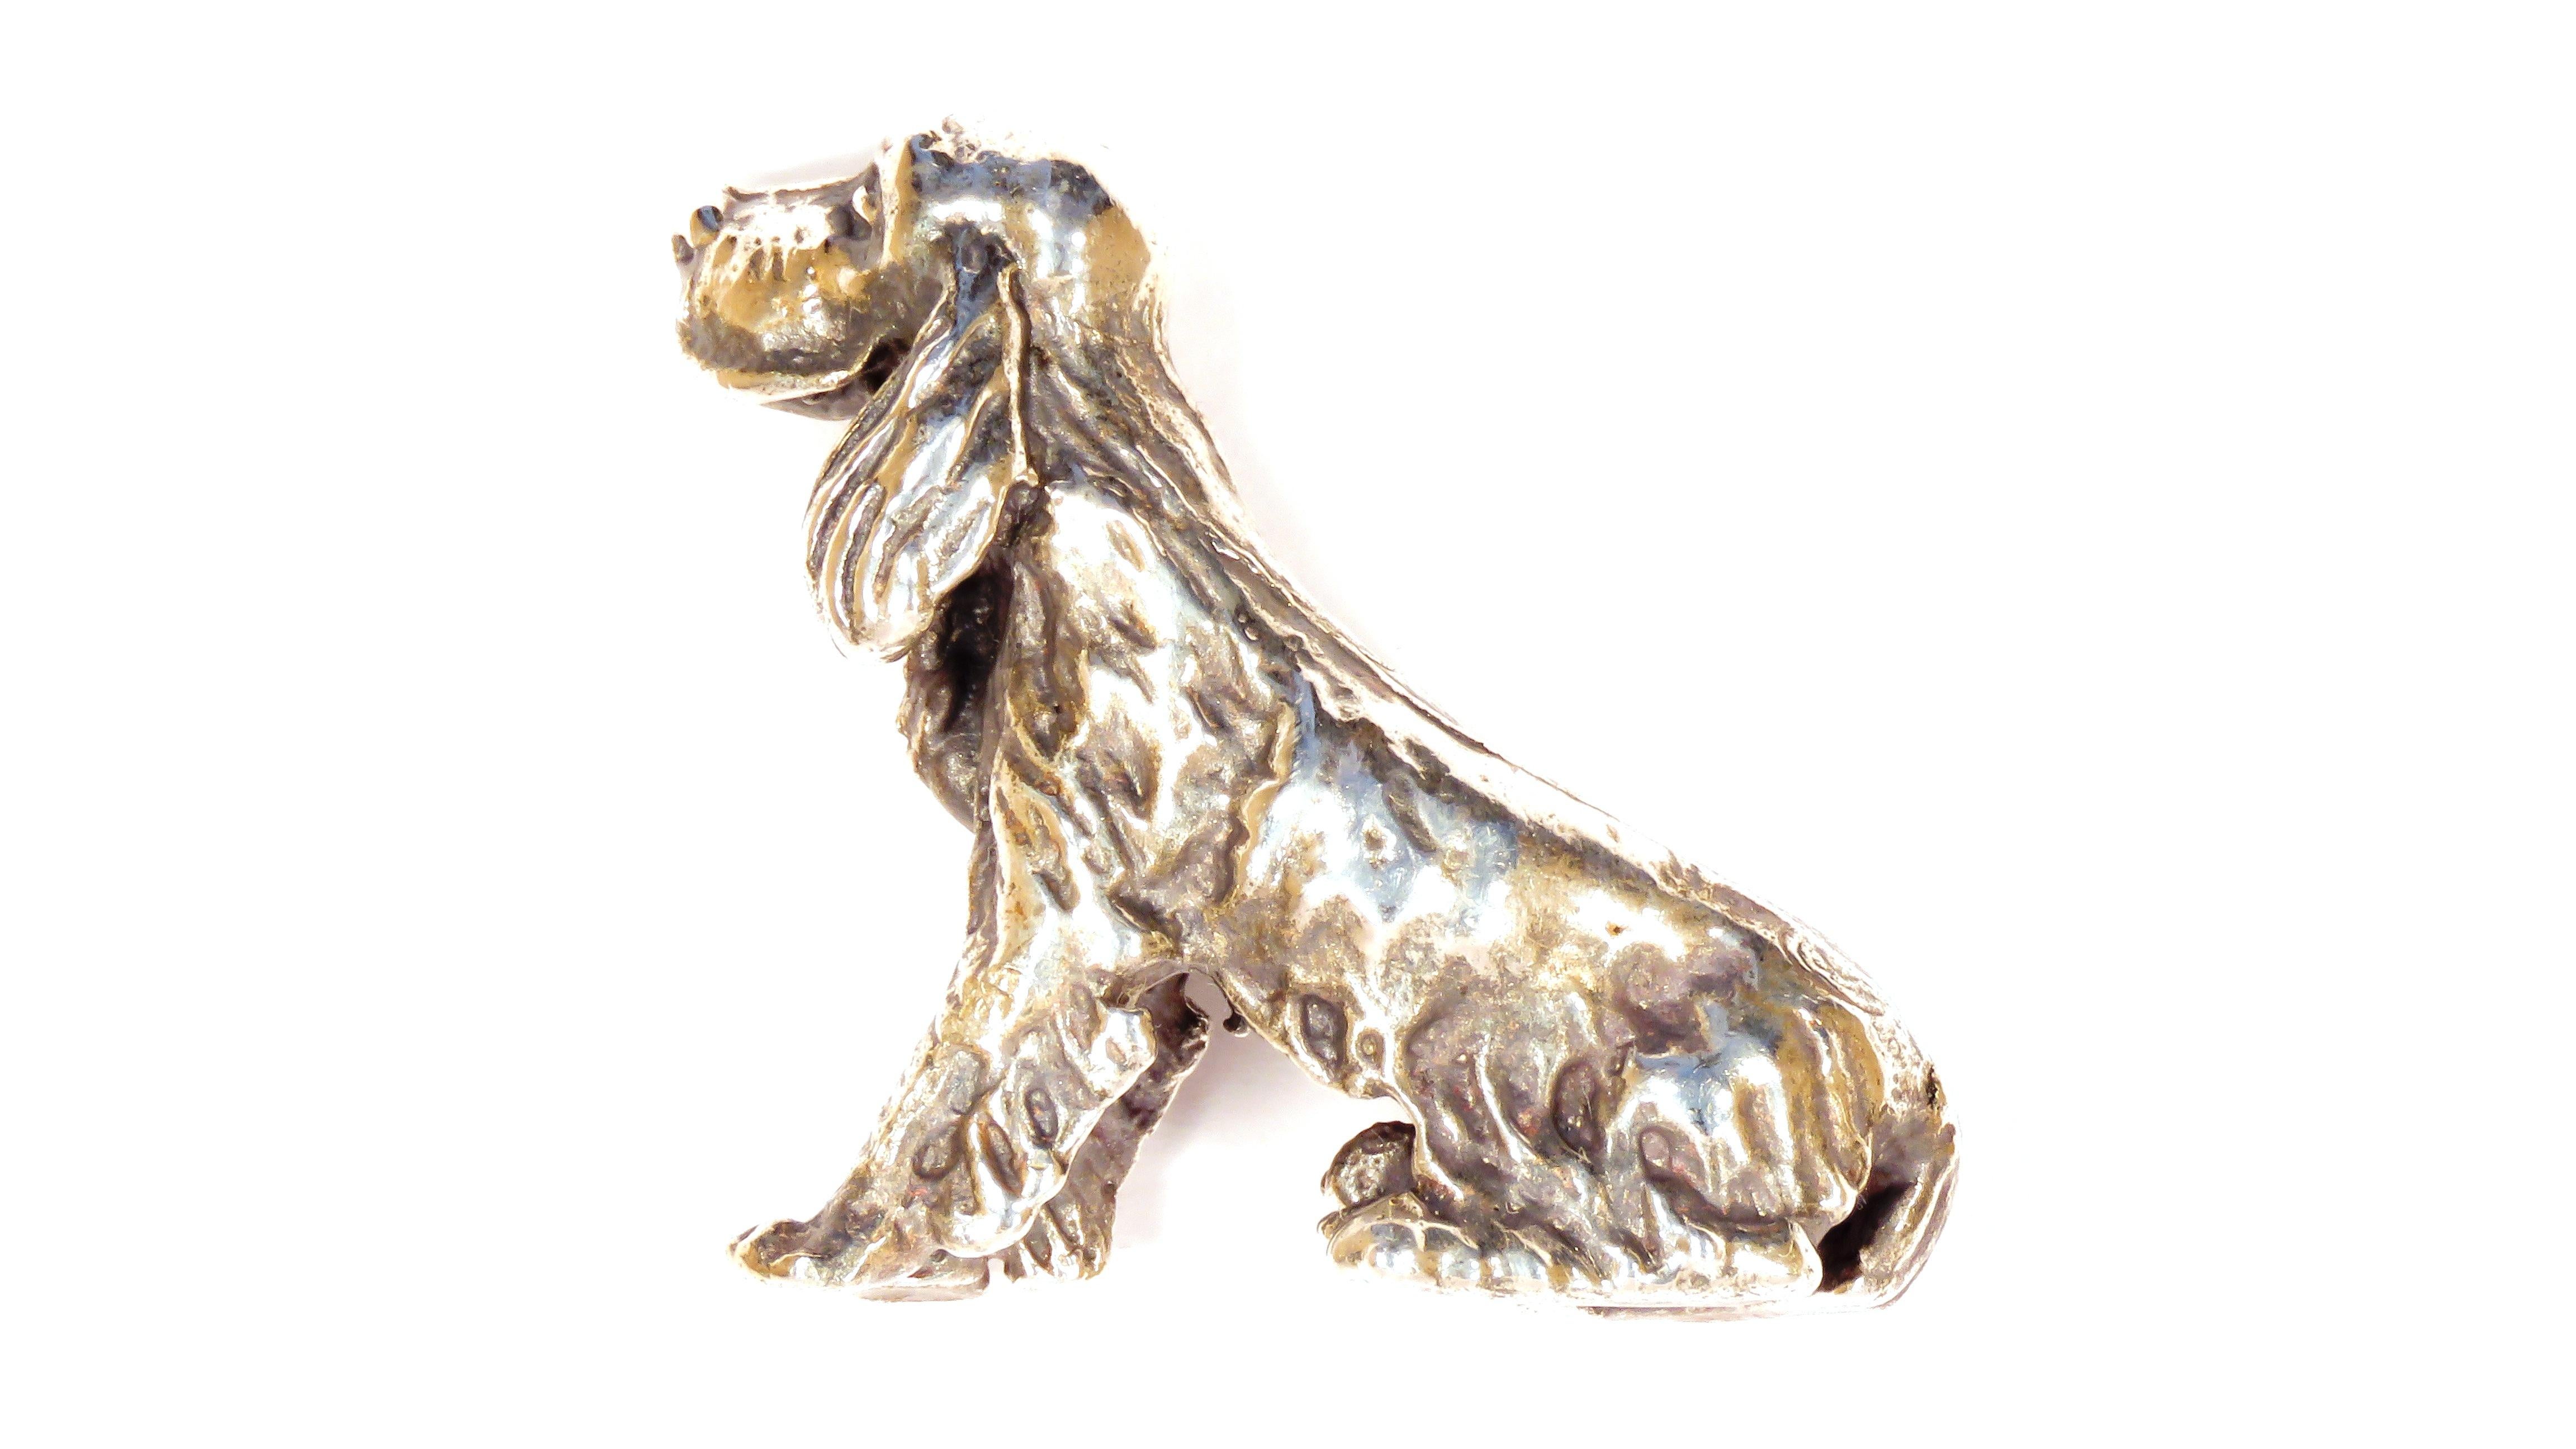 Solid silver Cocker Spanieln very good vintage condition.
Dimensions: Height 36 mm / 1..417 inches - Length 45 mm / 1.771 inches - Weight 34 grams.
It  is stamped with the Silver Italian Mark 800 - AR59 - Società orafa Aretina - Arezzo -